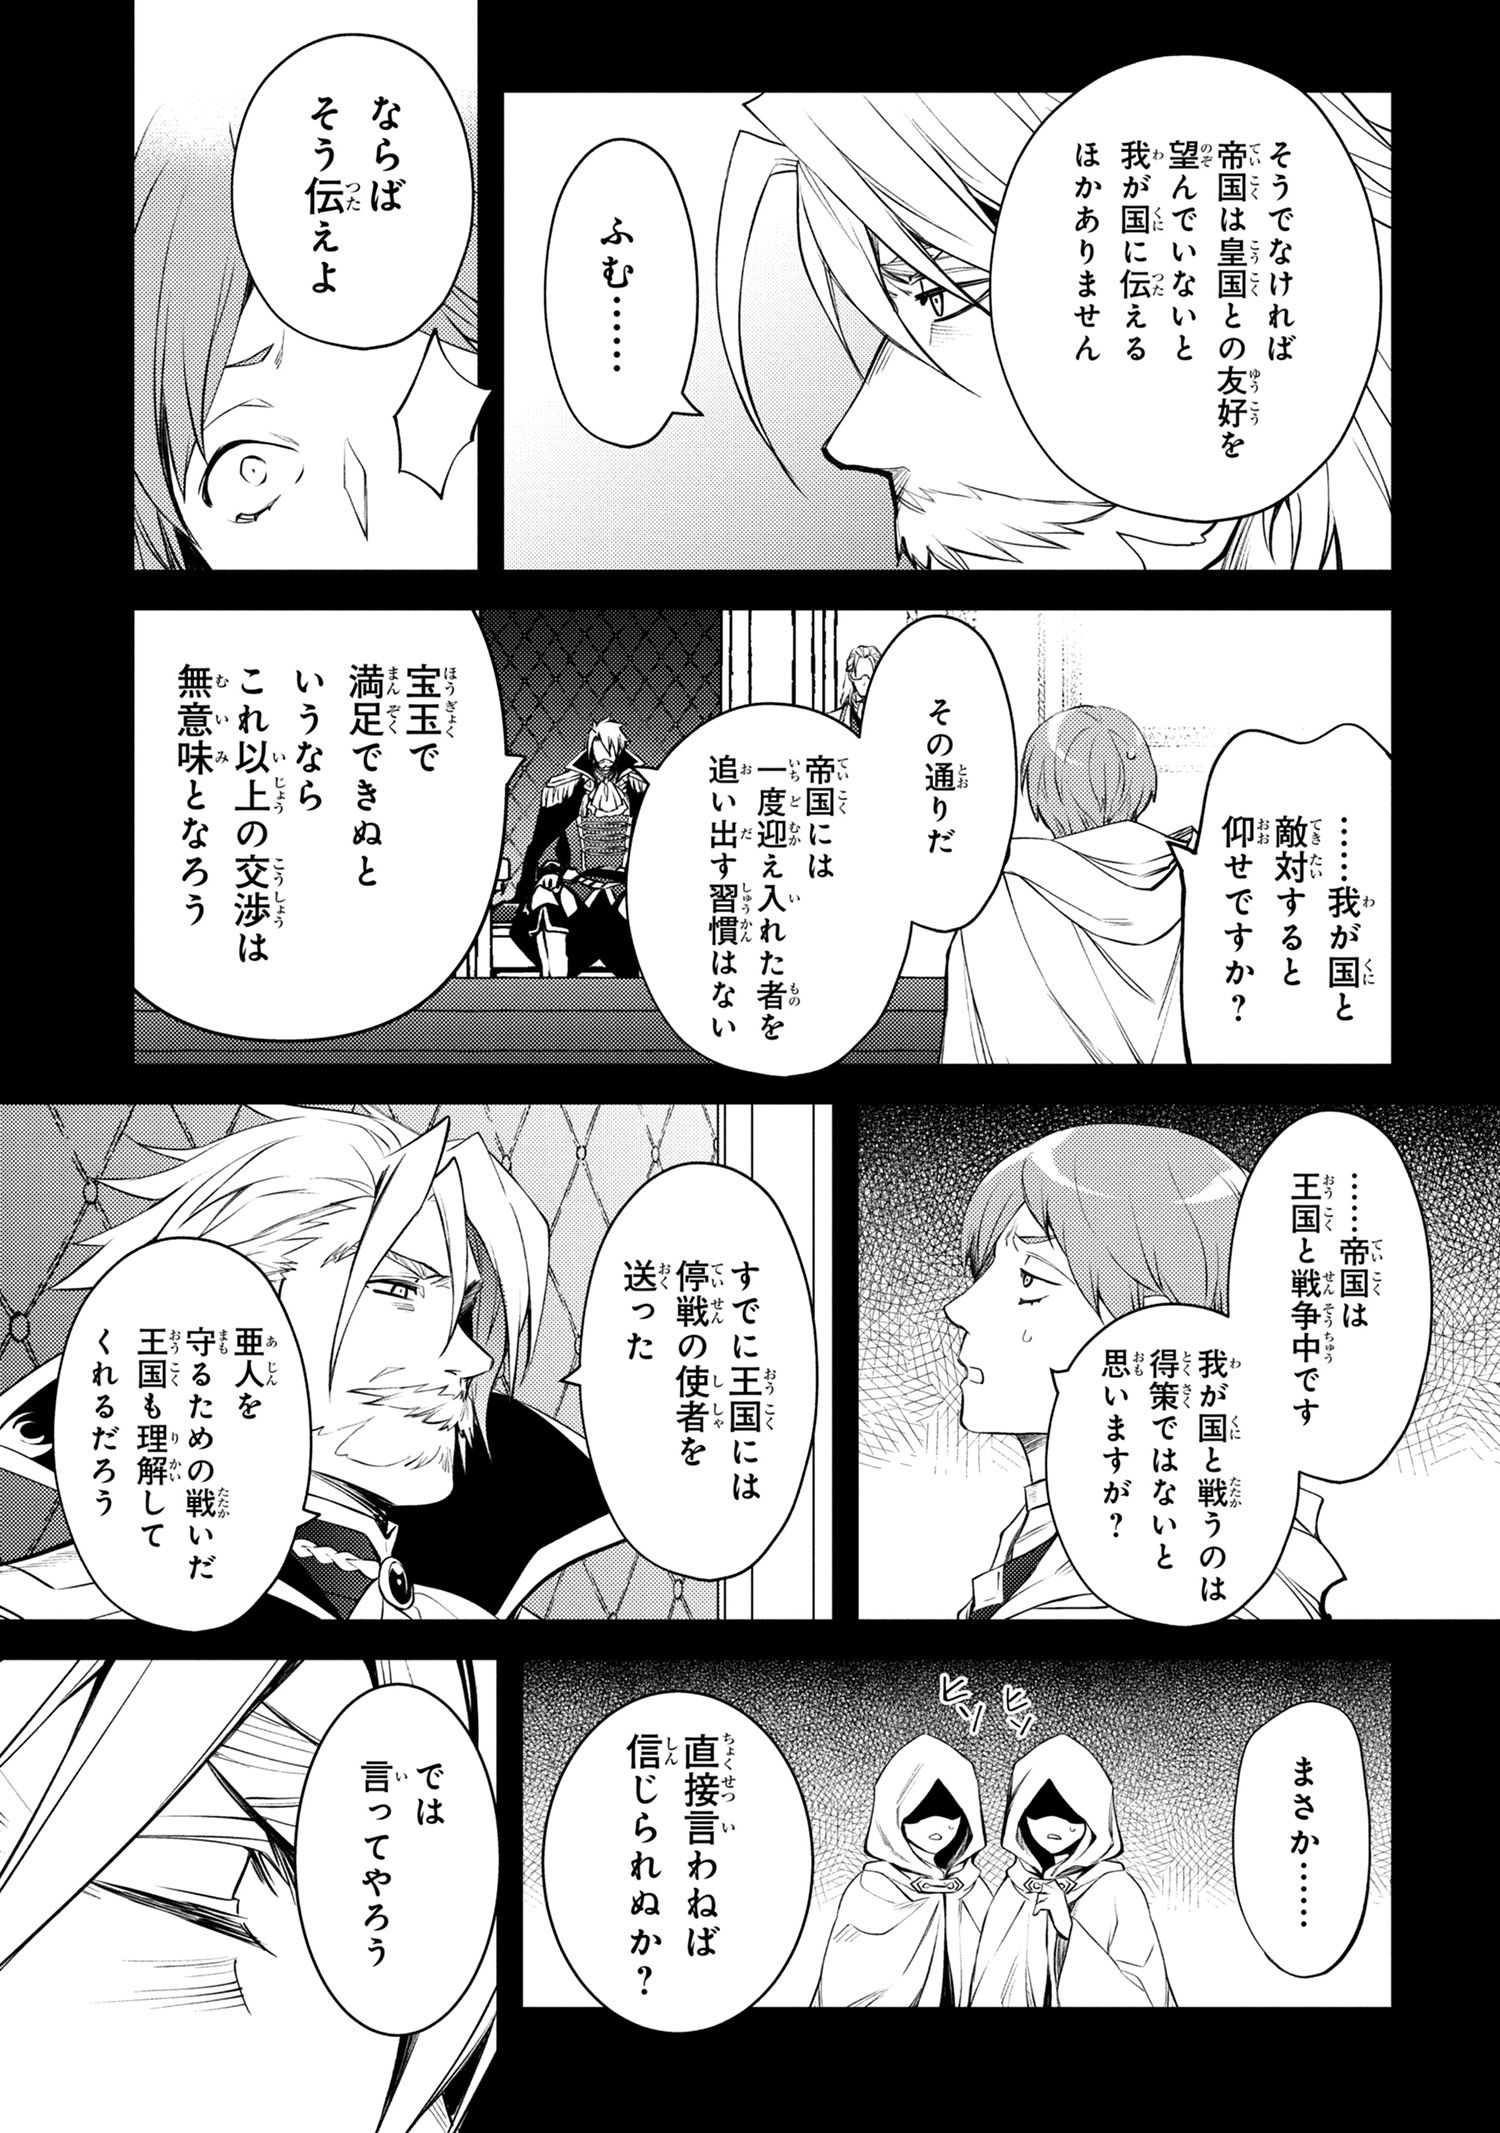 The Strongest Dull Prince’s Secret Battle for the Throne - Chapter 40.2 - Page 2